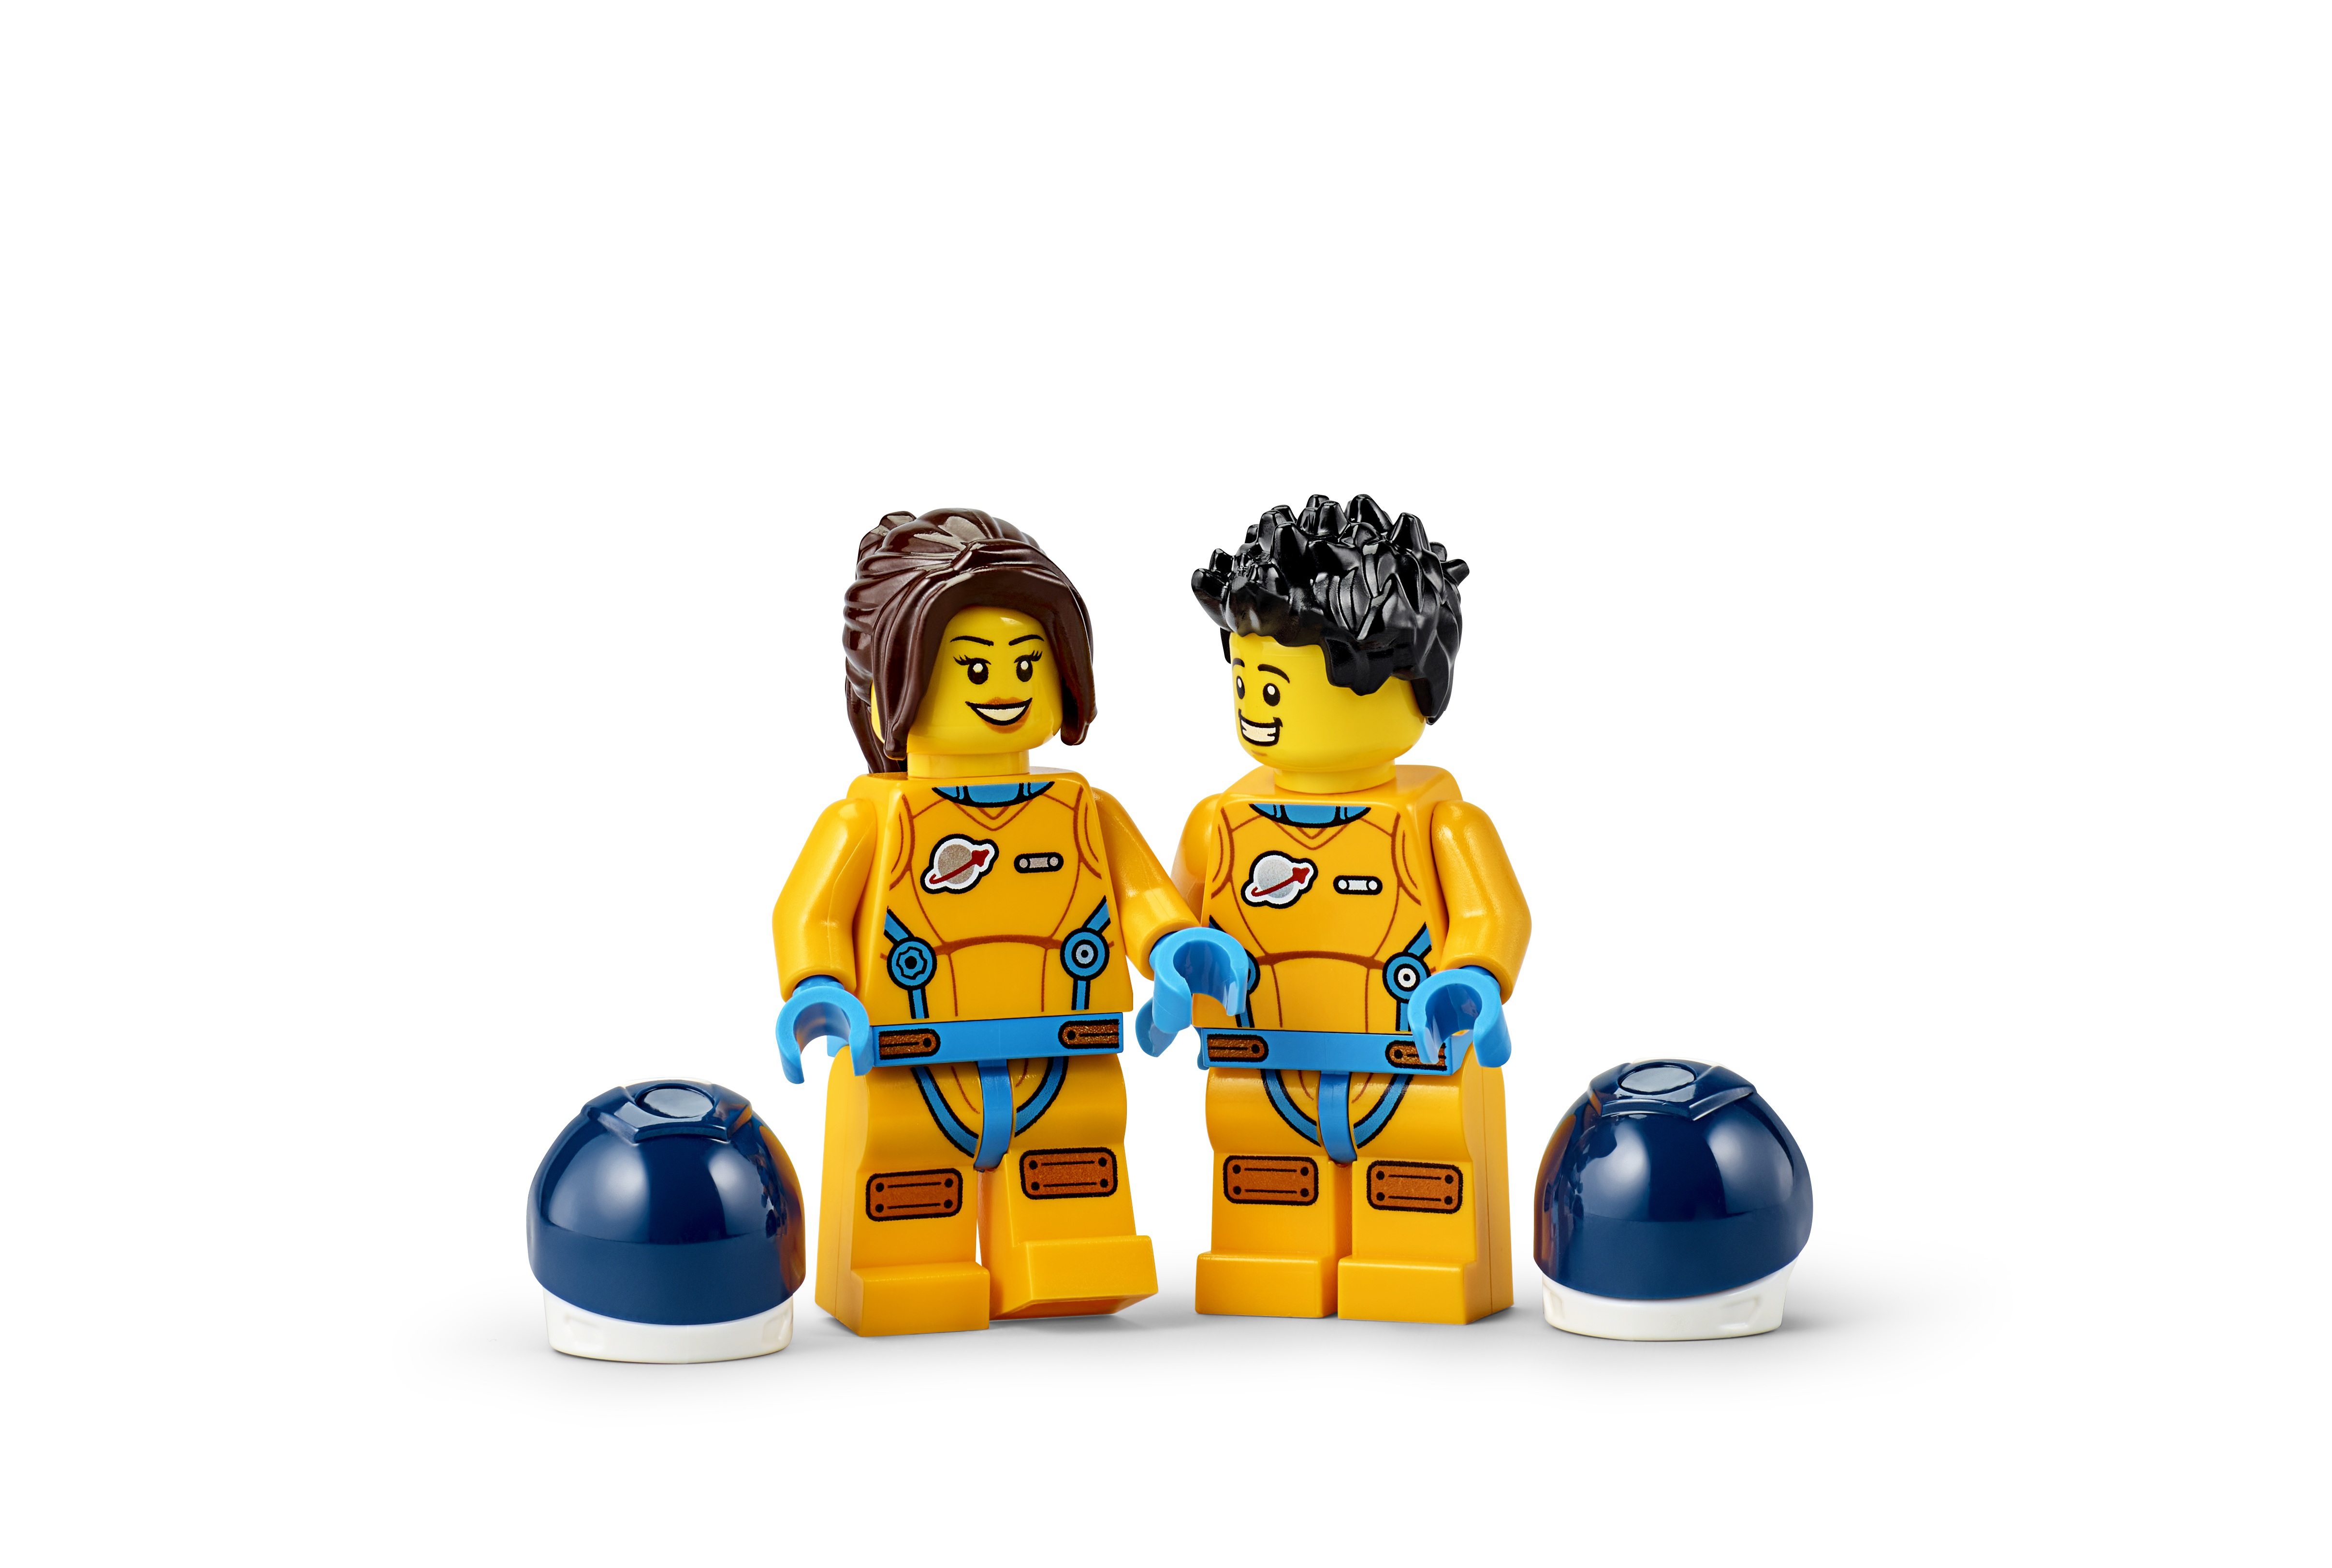 LEGO astronaut figurine. Please refer to picture for specifics. 